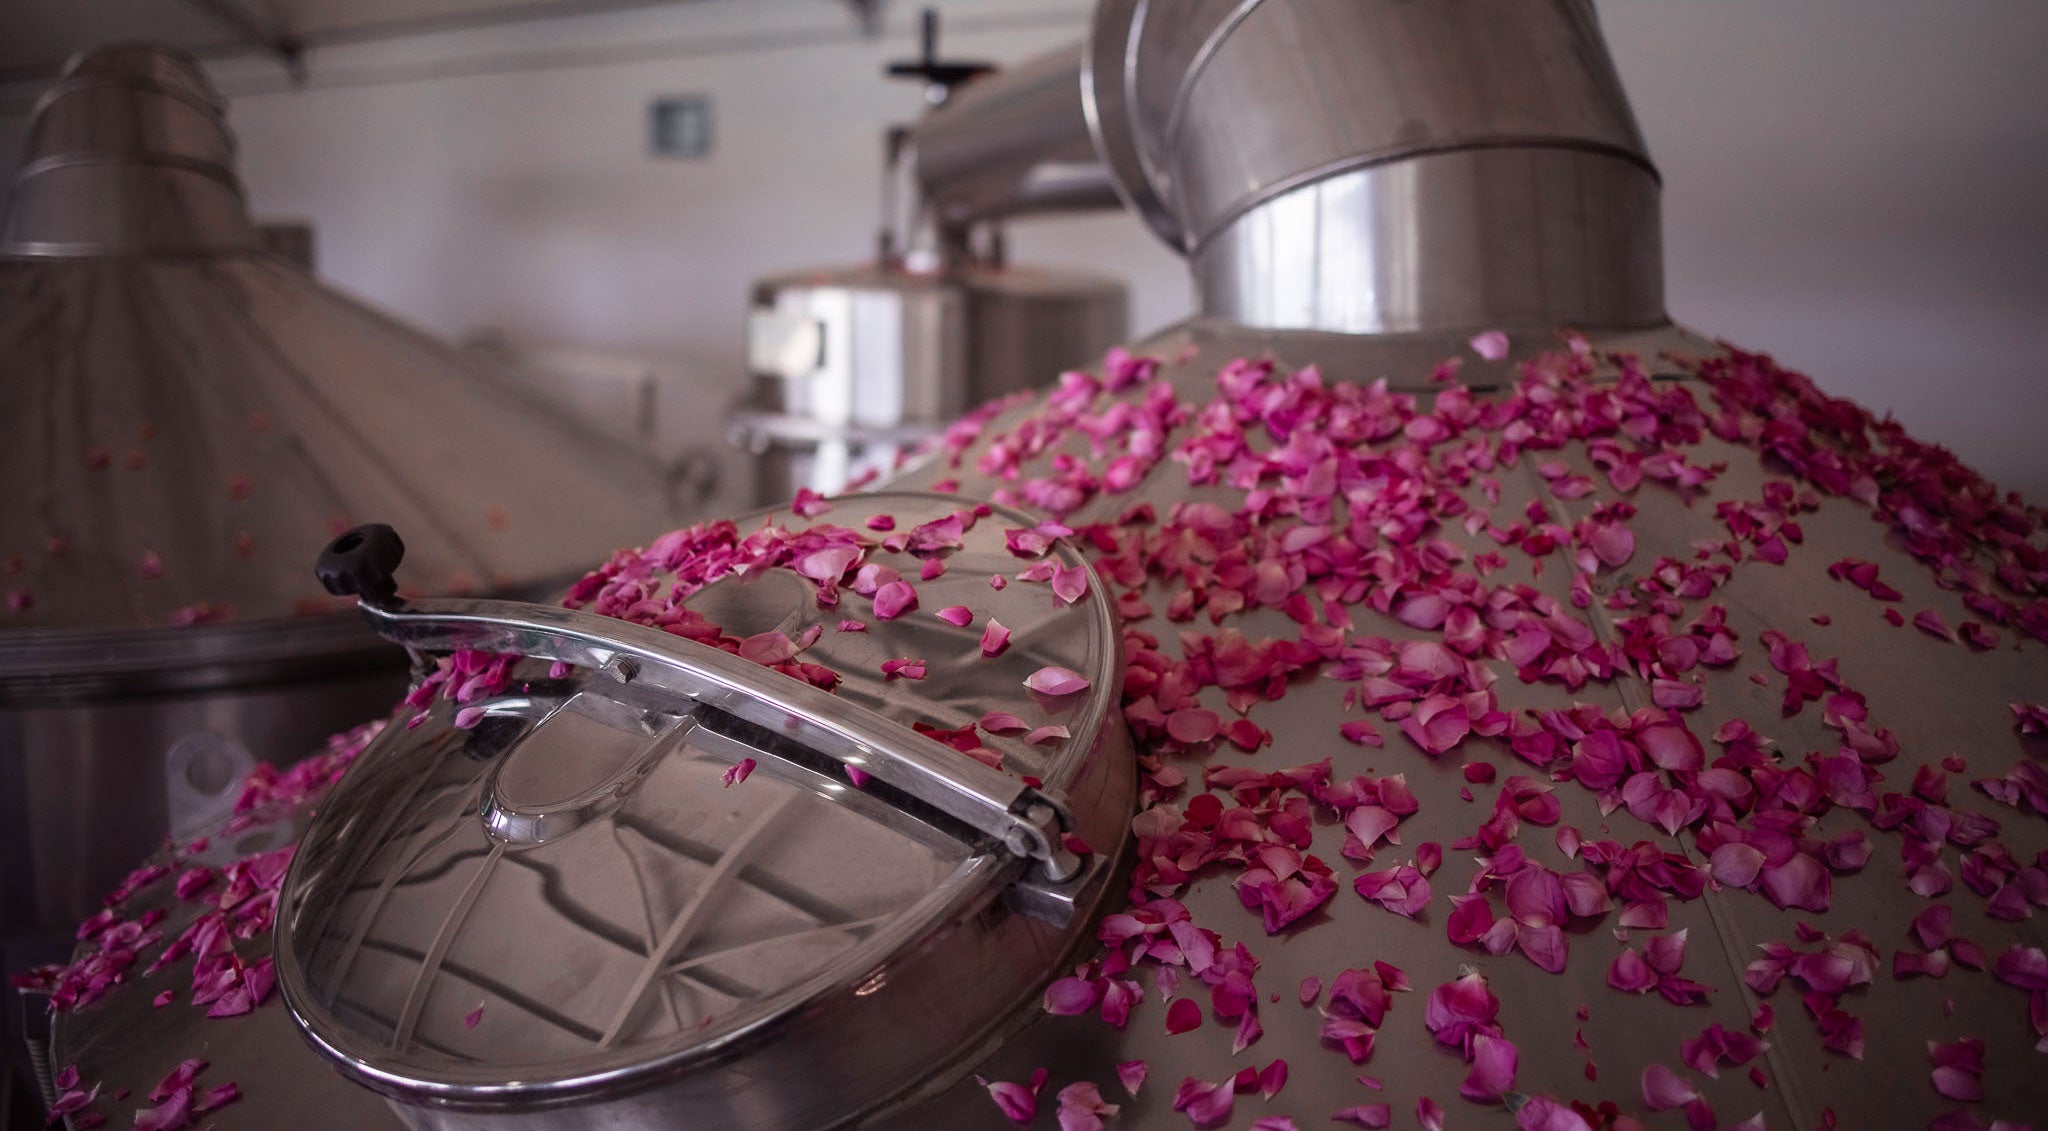 A pink rose, known as Alteya, is delicately placed on top of a stainless steel tank.